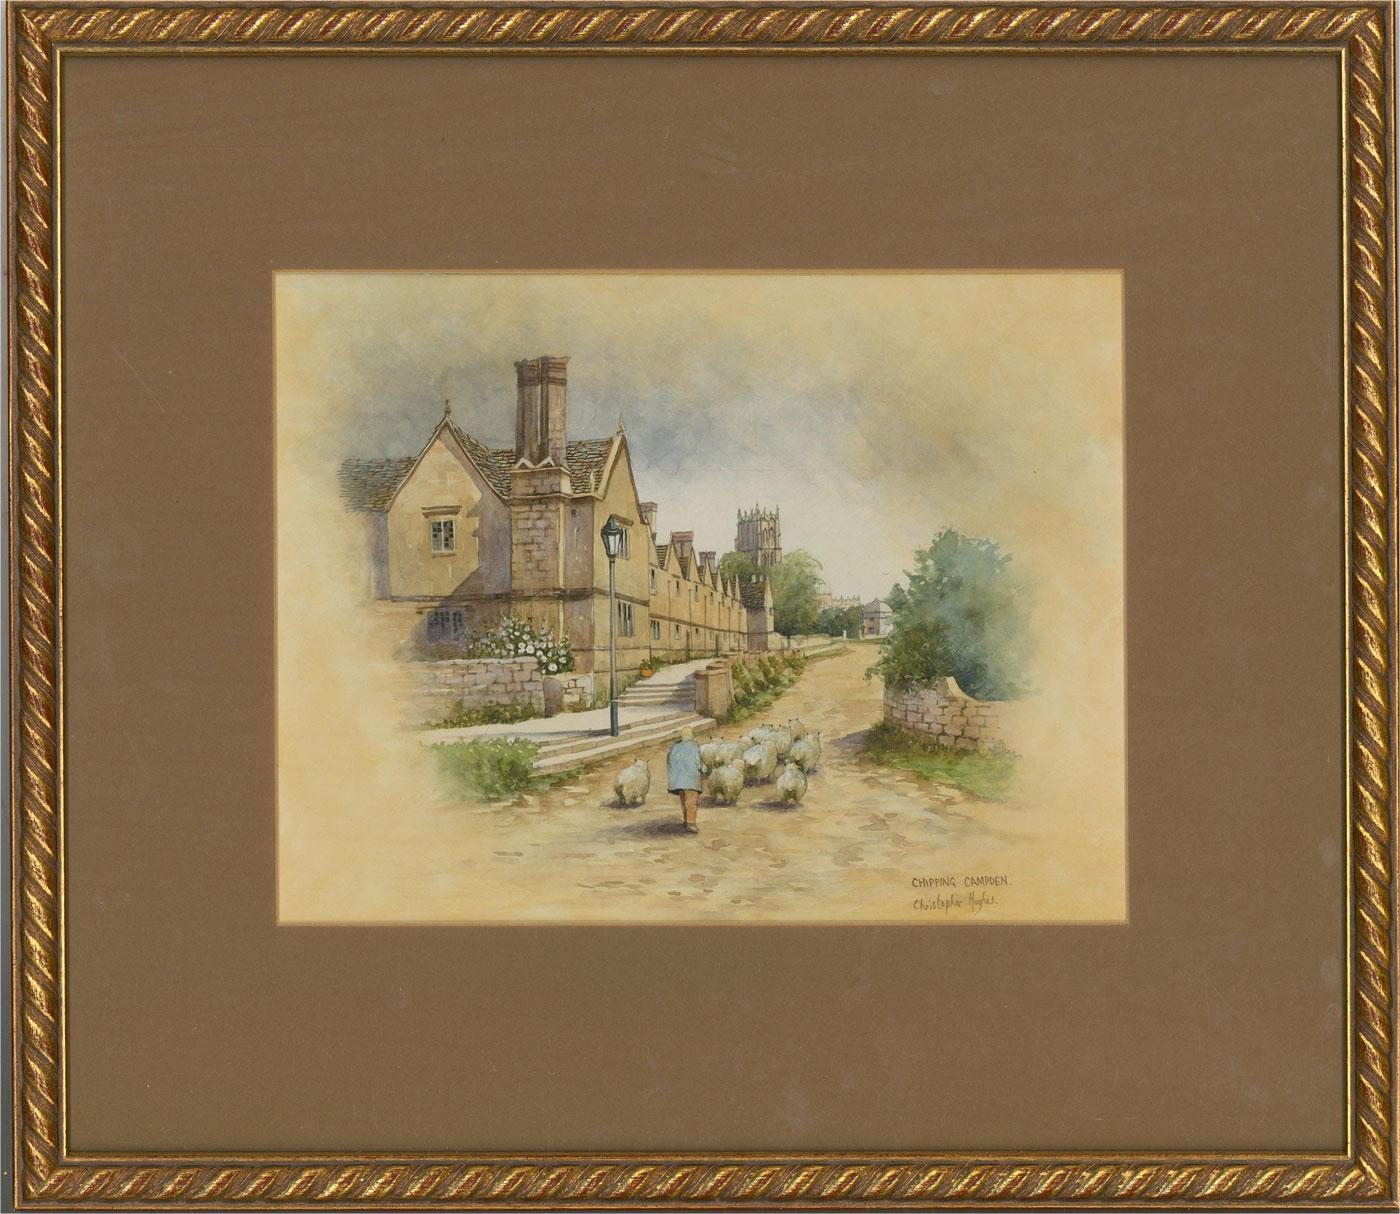 A street scene in the Cotswold market town of Chipping Campden. A figure herds a flock of sheep along the street. Presented glazed in a brown mount and a distressed gilt-effect wooden frame with twisted rope moulding at the edge. Signed and